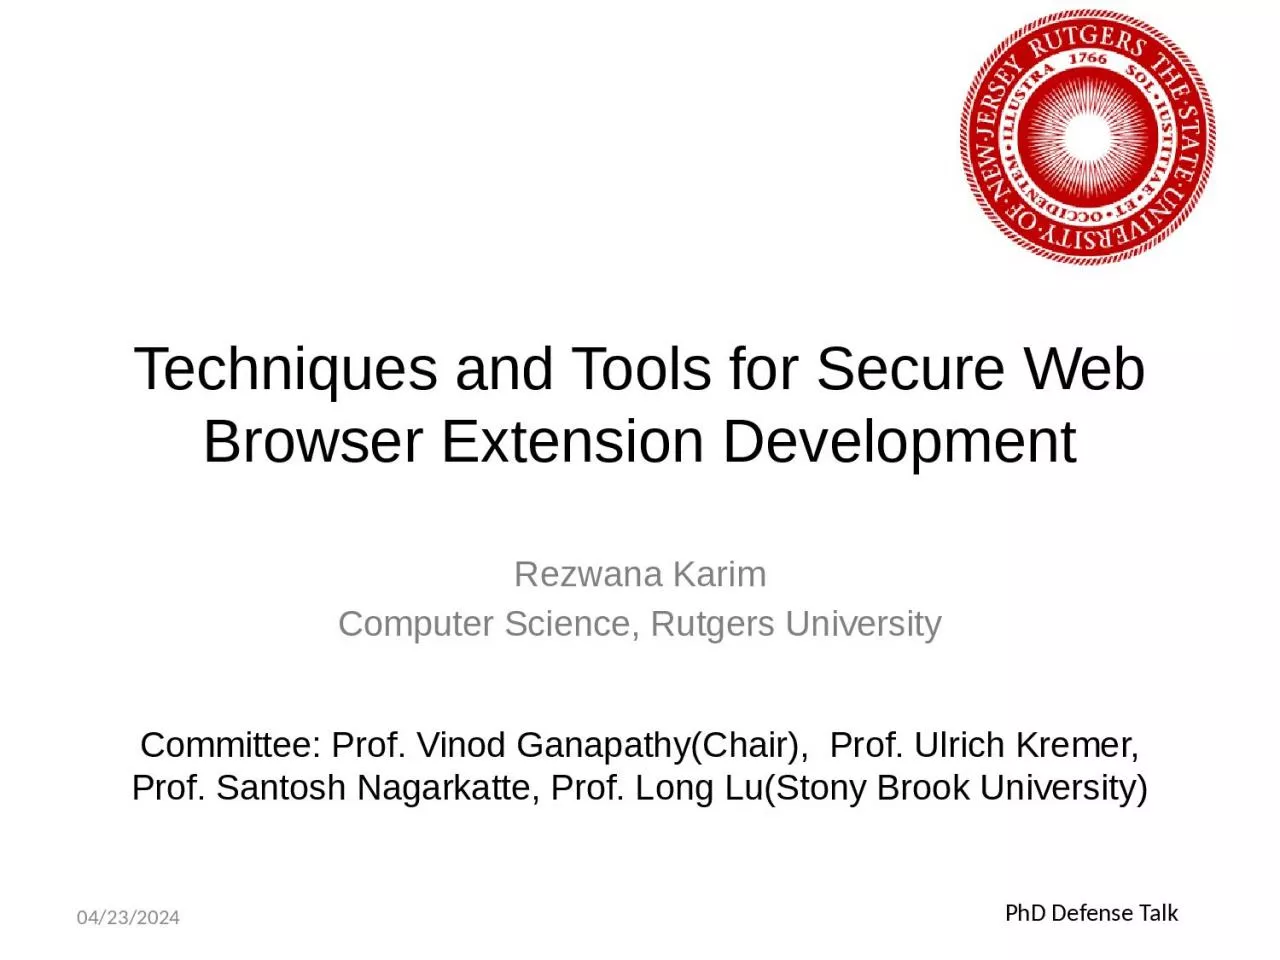 Techniques and Tools for Secure Web Browser Extension Development